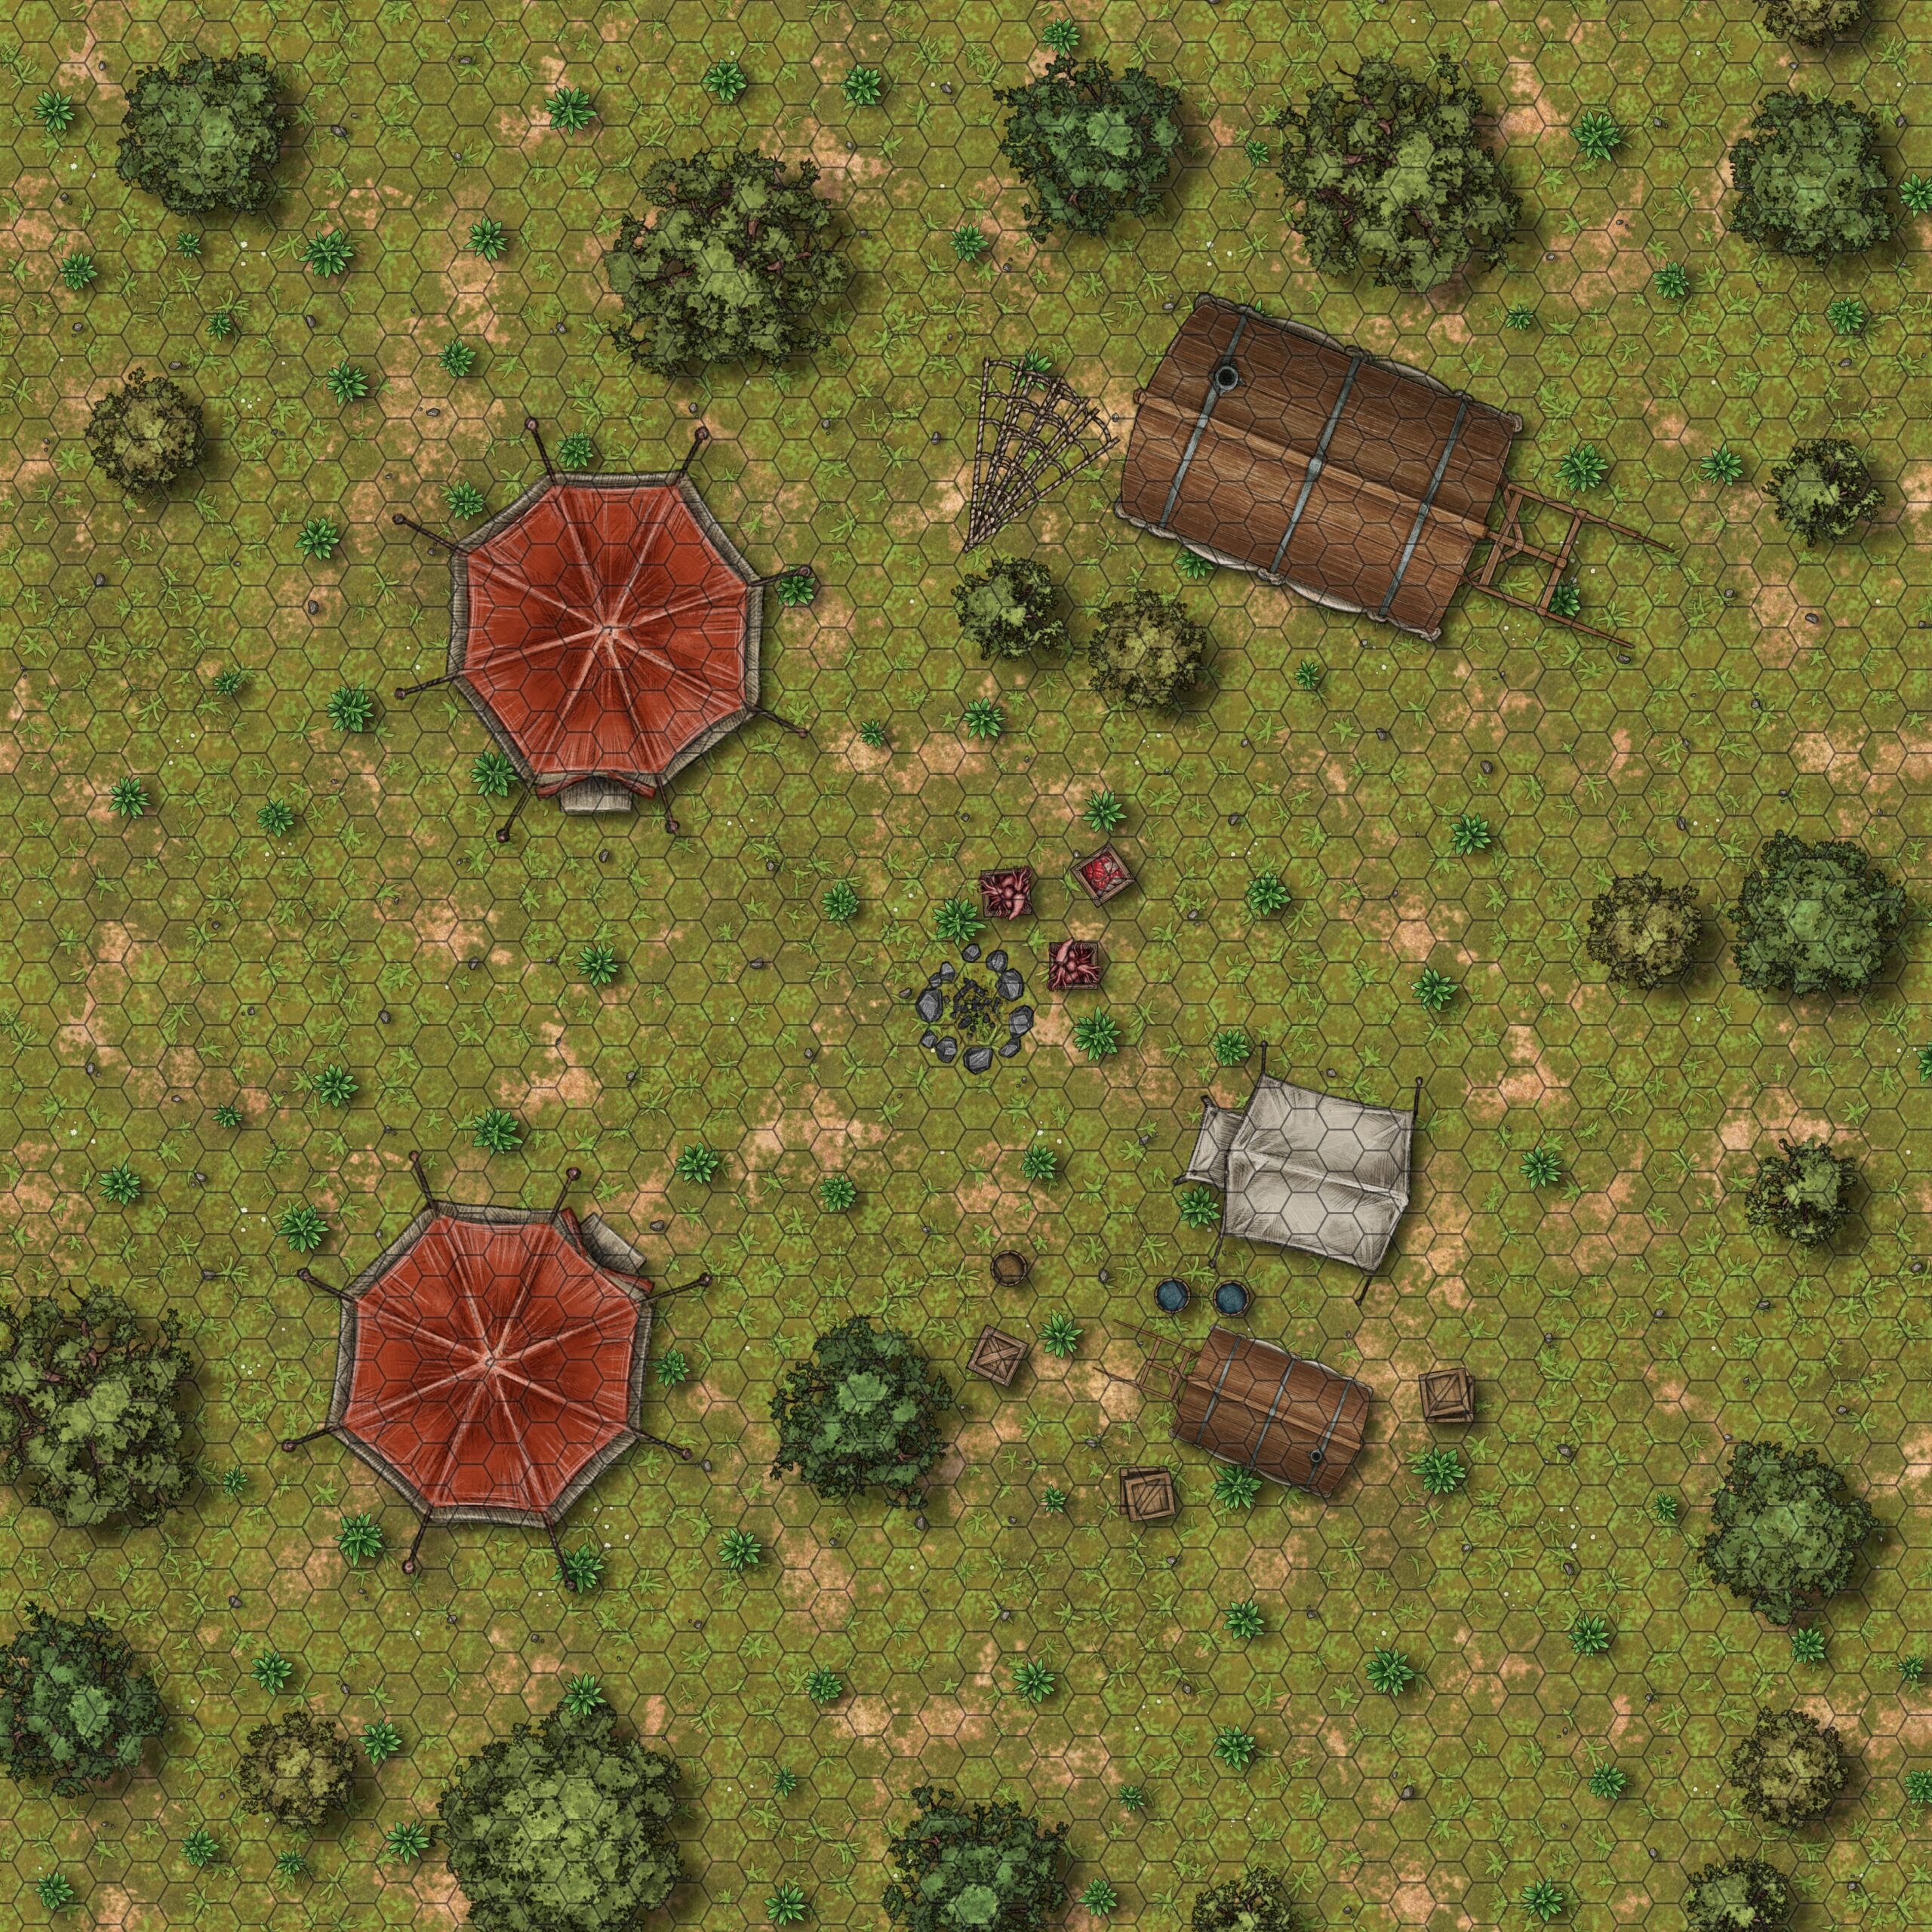 A camp in a forest clearing, surrounded on all sides but the left with deciduous trees. Two large leather octagonal tents big enough to sleep a dozen people each are set up at 10:00 and 8:00 positions. A campfire smolders in the center with three food crates by it. At the 1:00 position, a huge wooden wagon the size of the tents sits with a large net dropped outside the back of it. In the lower right quadrant are a smaller beige tent with room for four next to a wagon about the same size as that tent. Strewn around the wagon are three wooden crates, two water barrels, and a closed barrel.